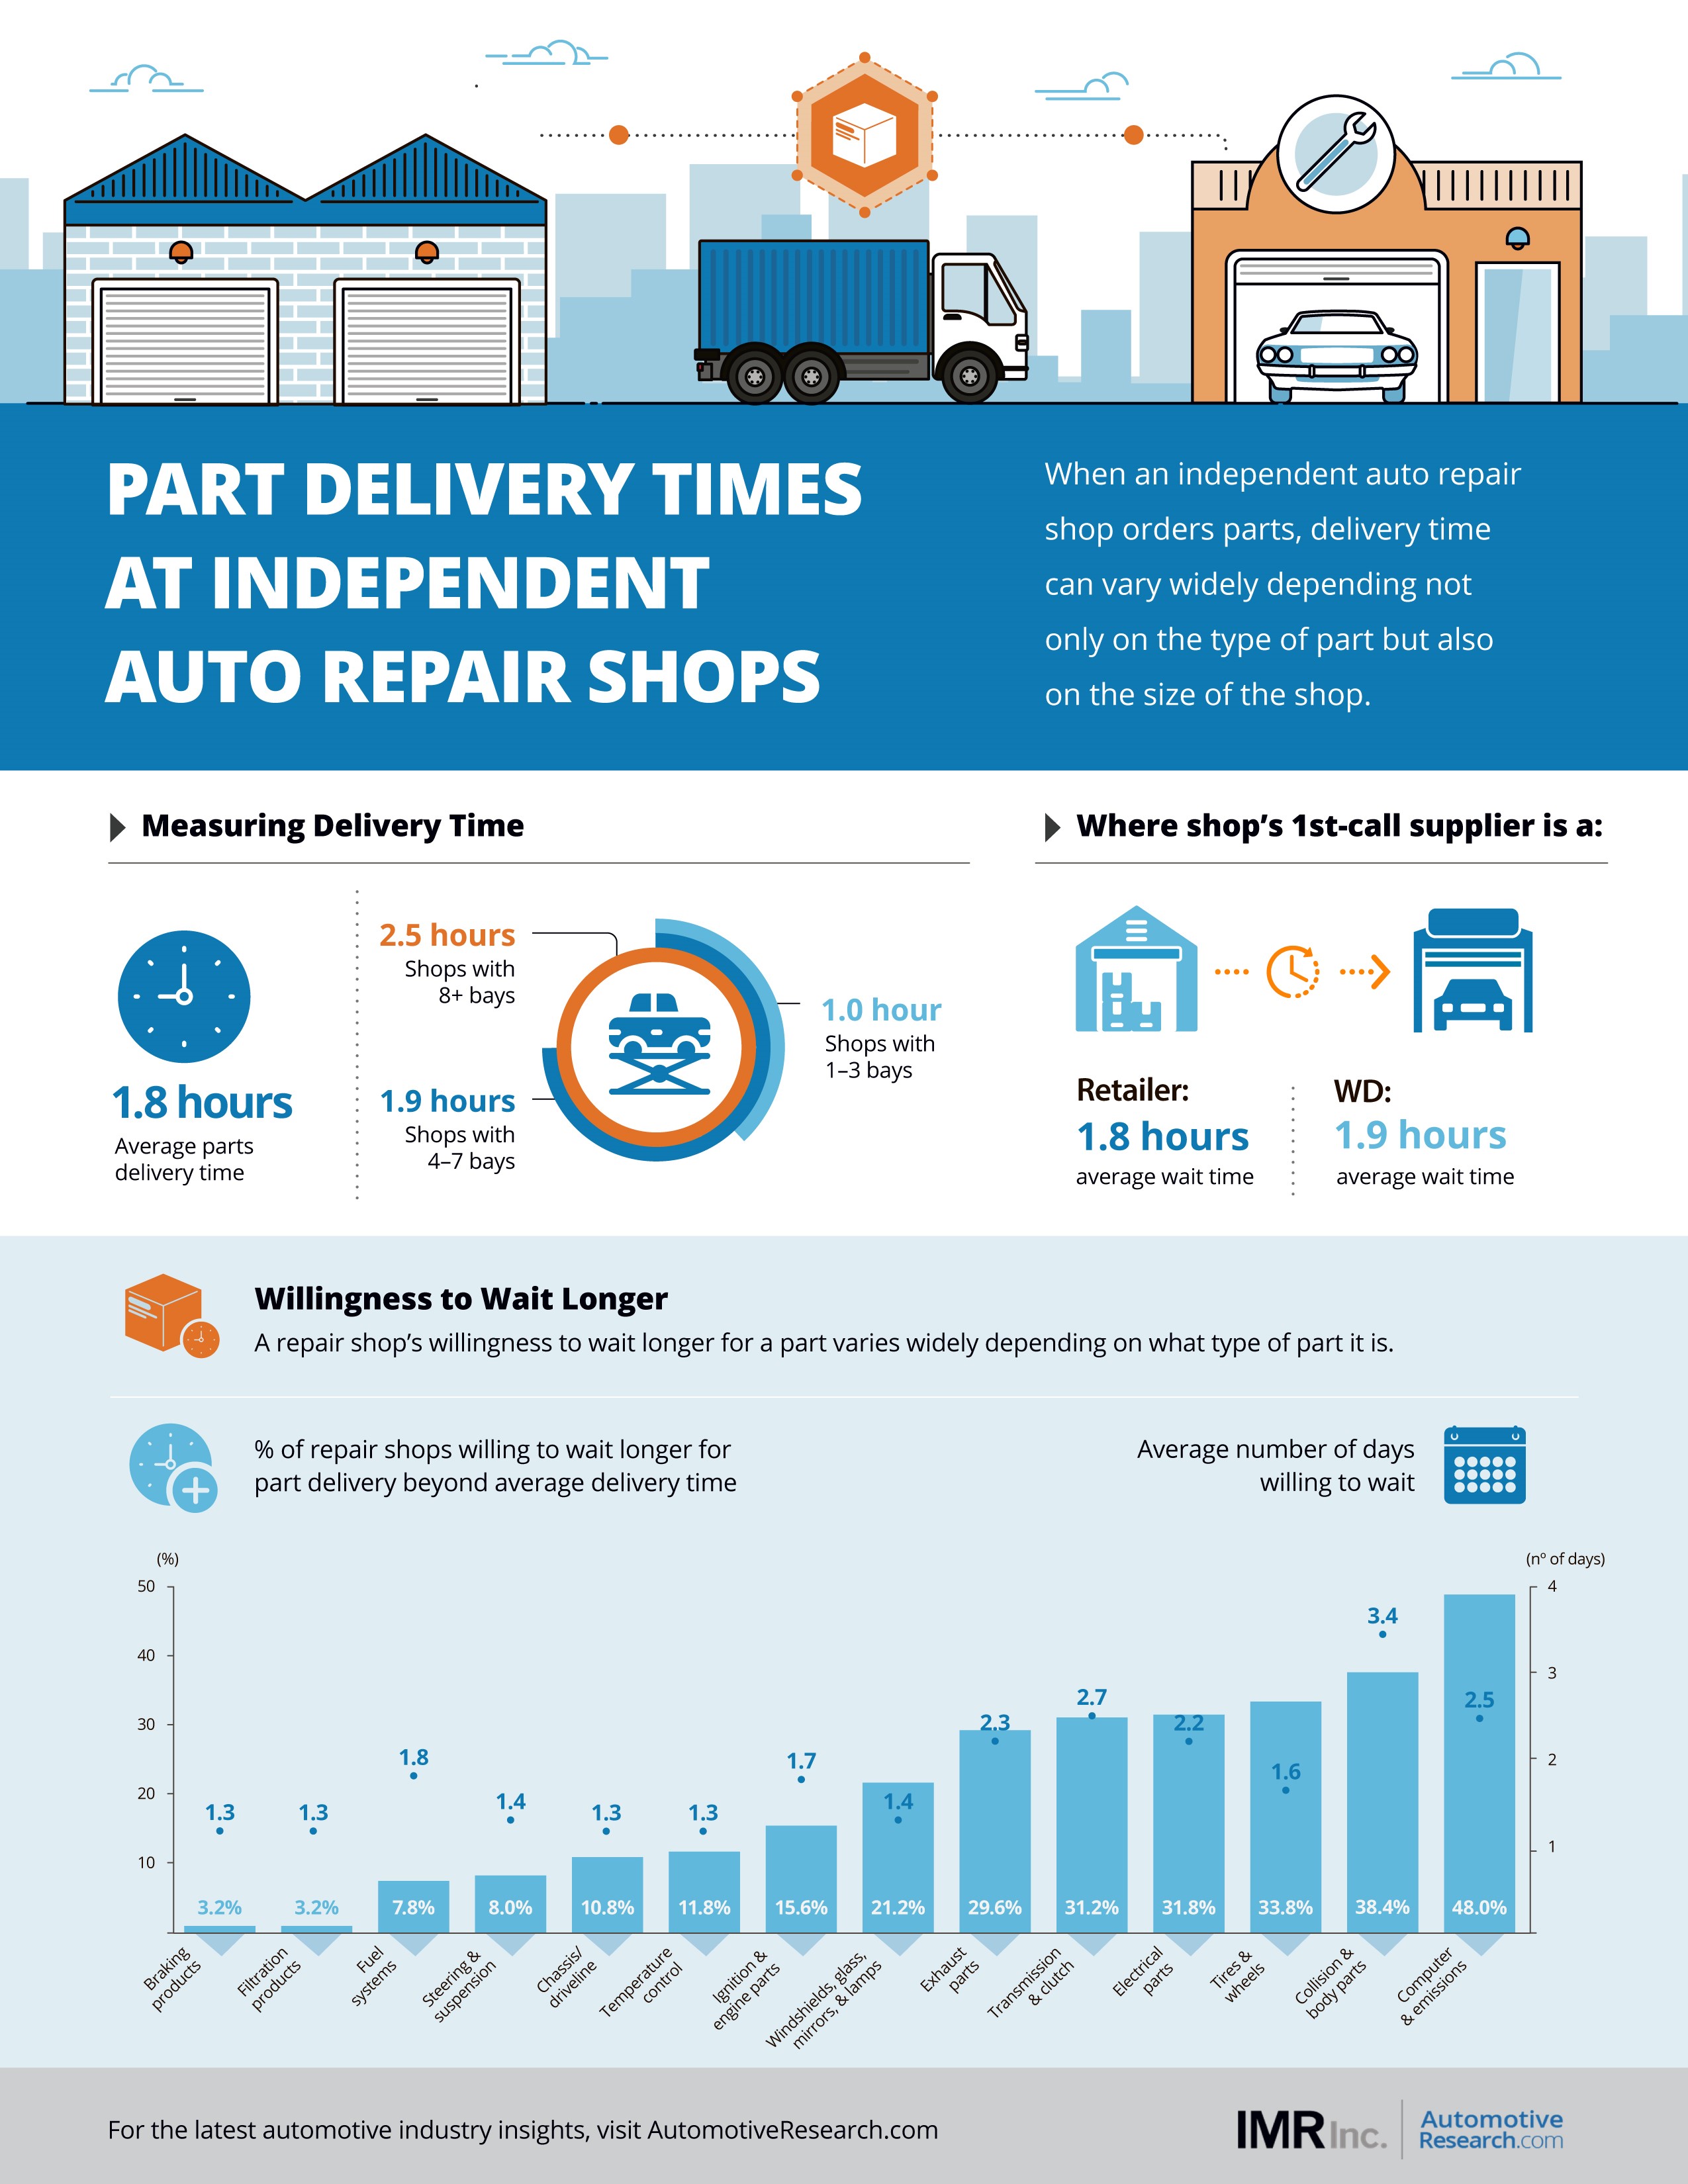 IMR Automotive Market Research Auto Repair Shops Part Delivery Times Infographic